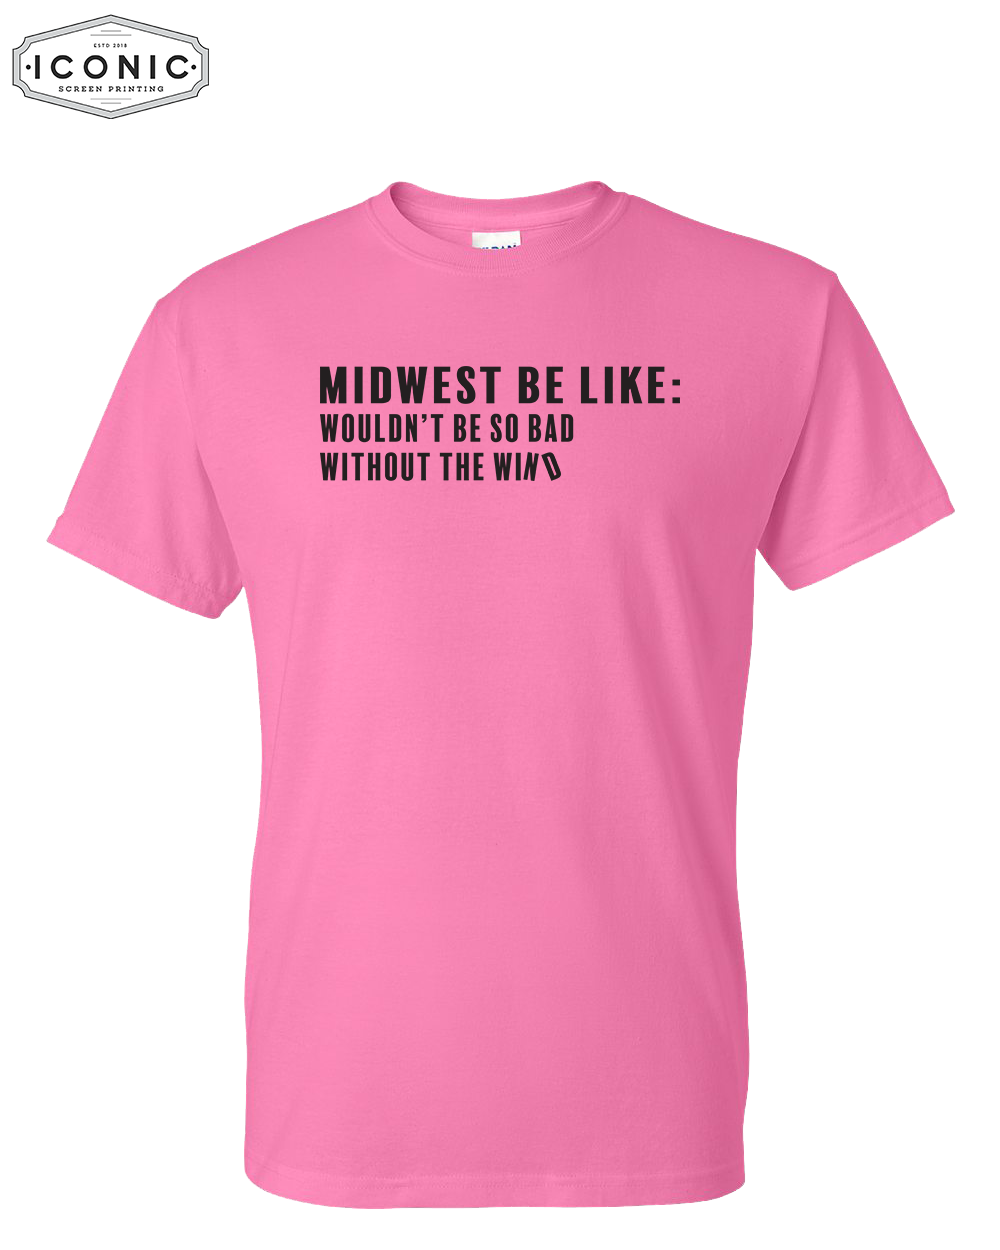 Midwest Be Like - DryBlend T-shirt